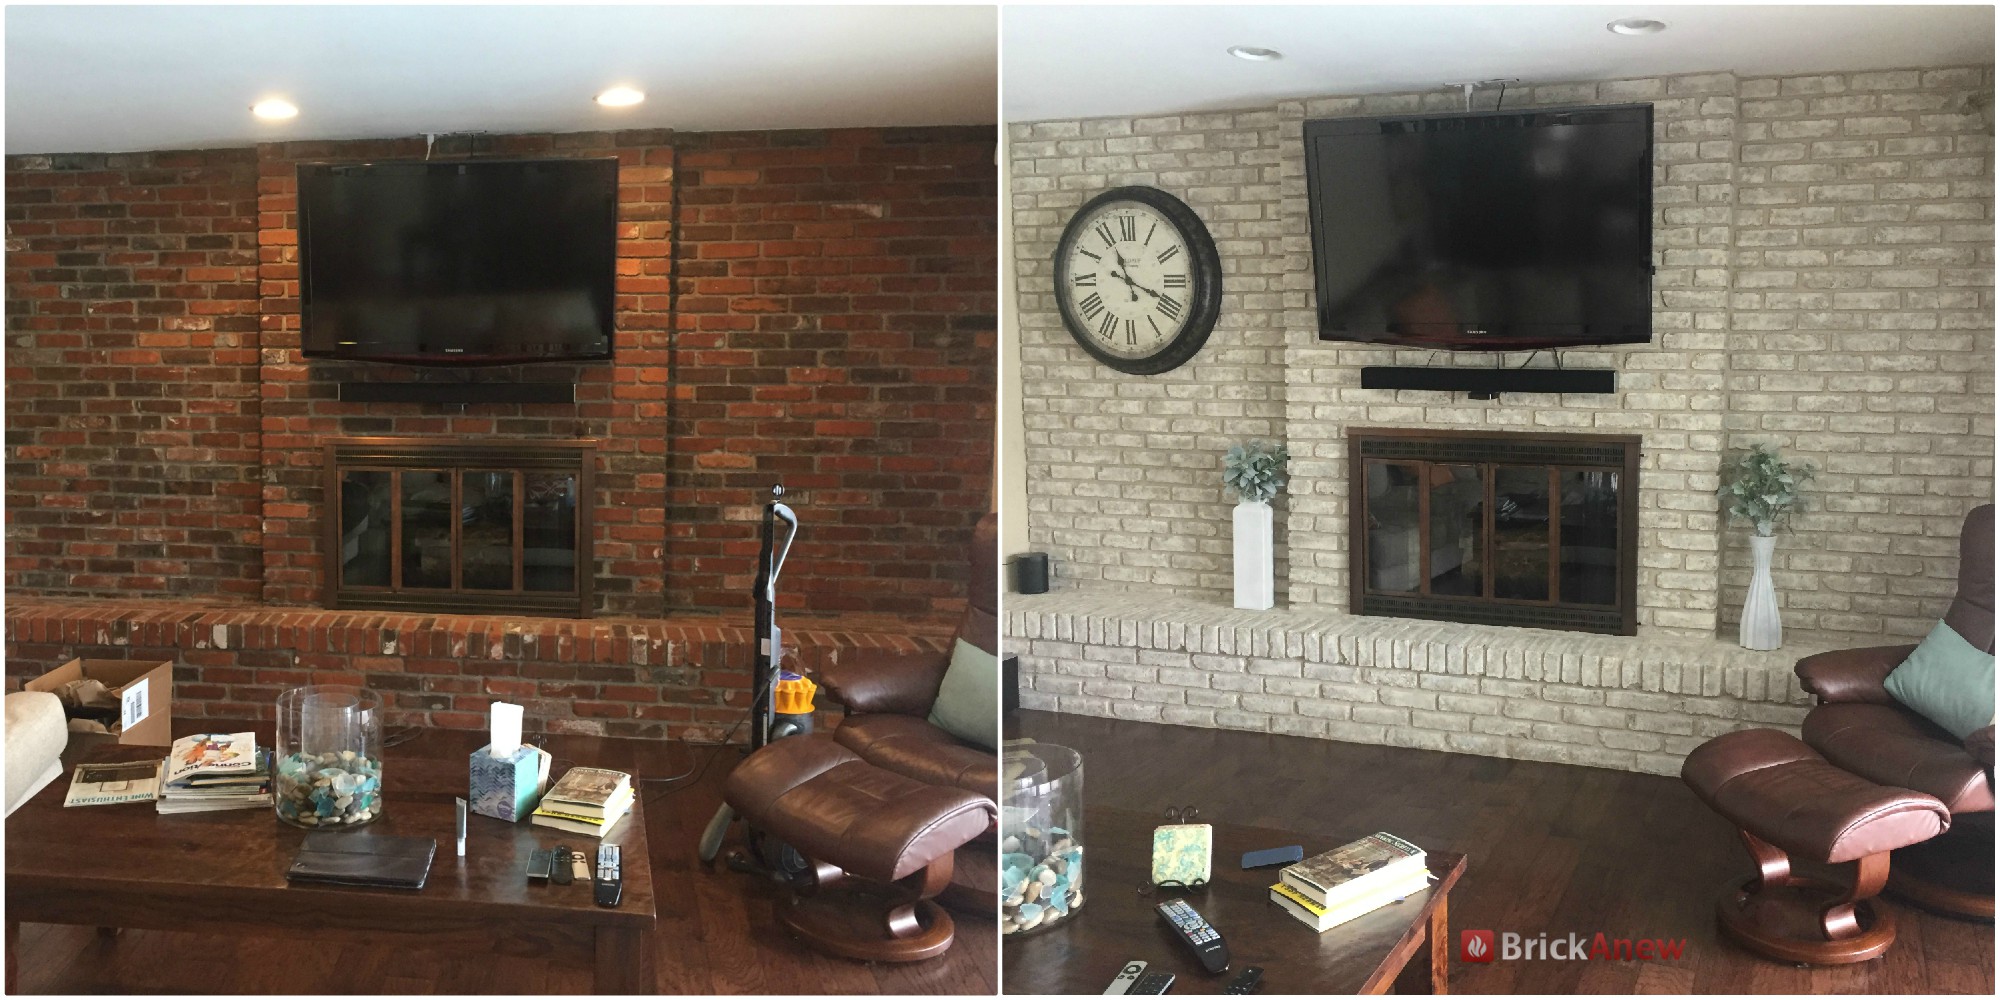 Brick-Anew Fireplace Paint Makeover